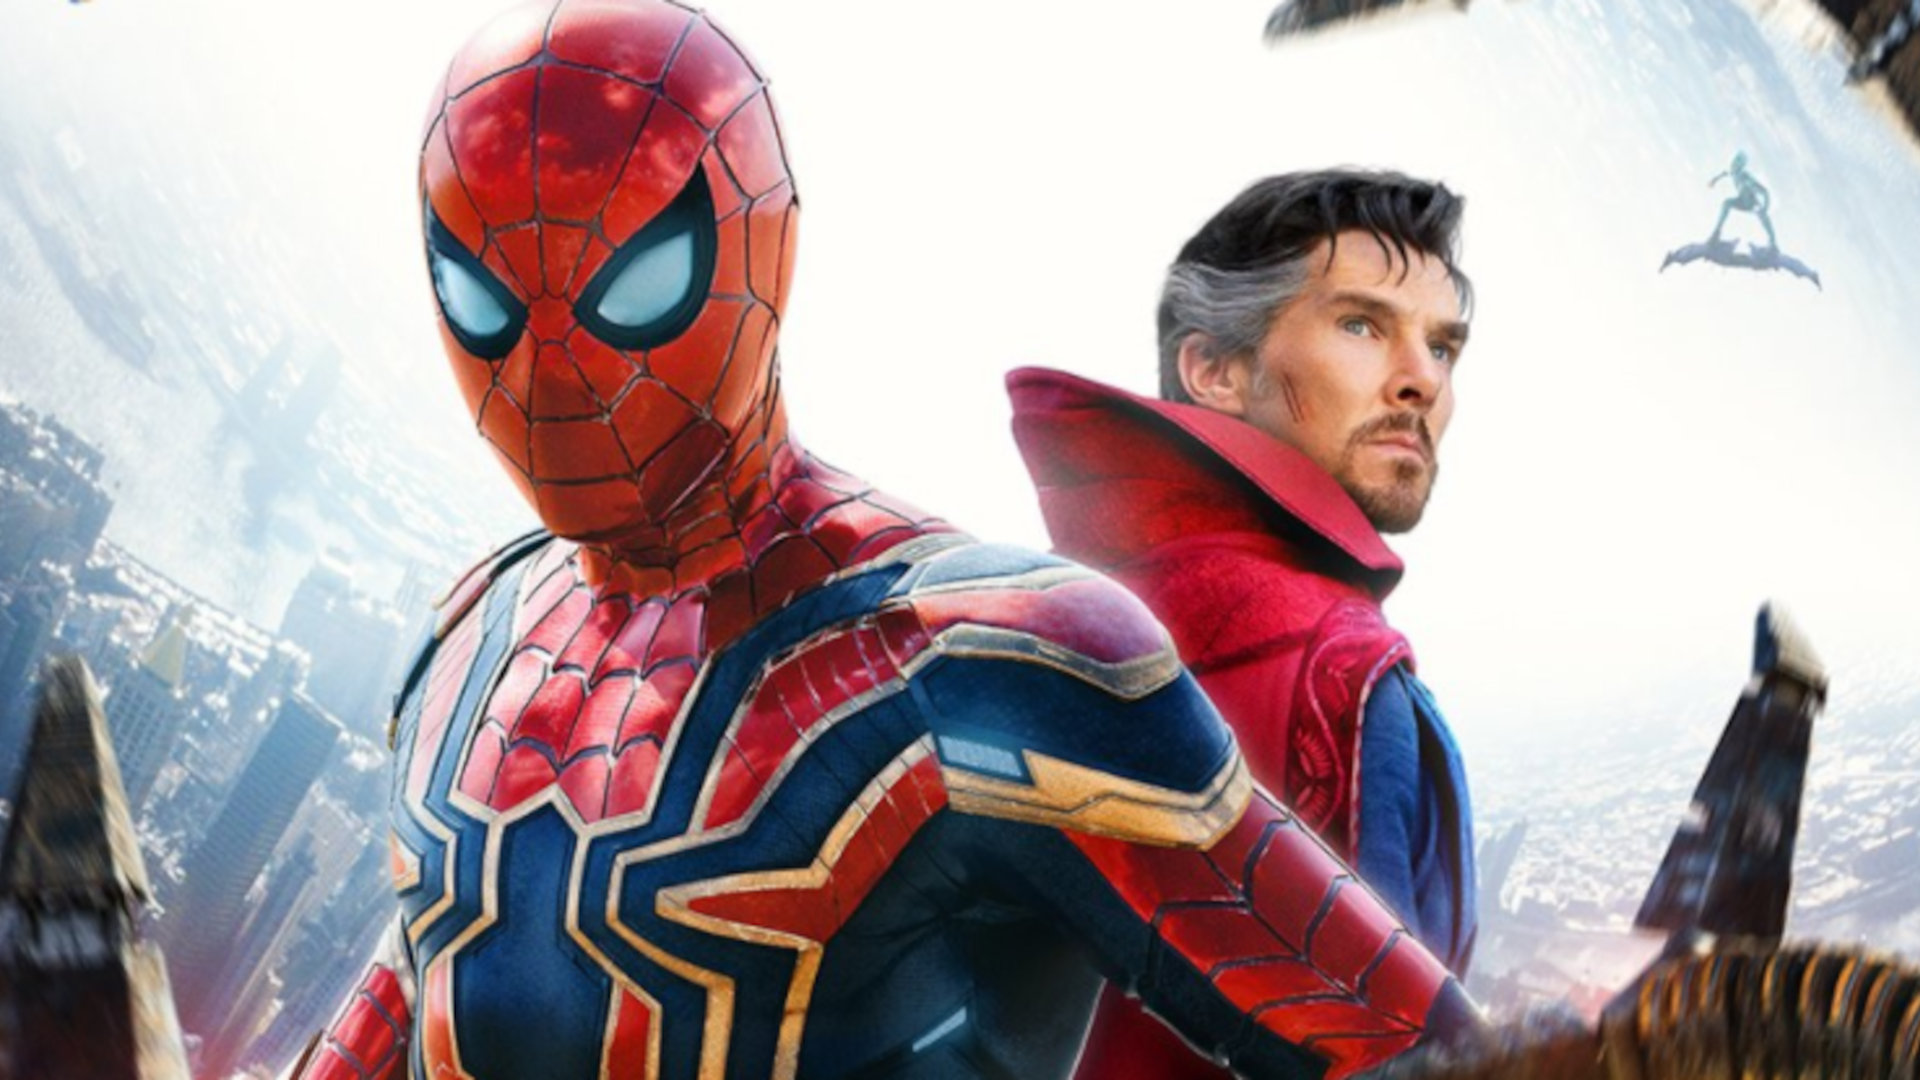 Spider Man: No Way Home Release Date, Cast, And How To Watch